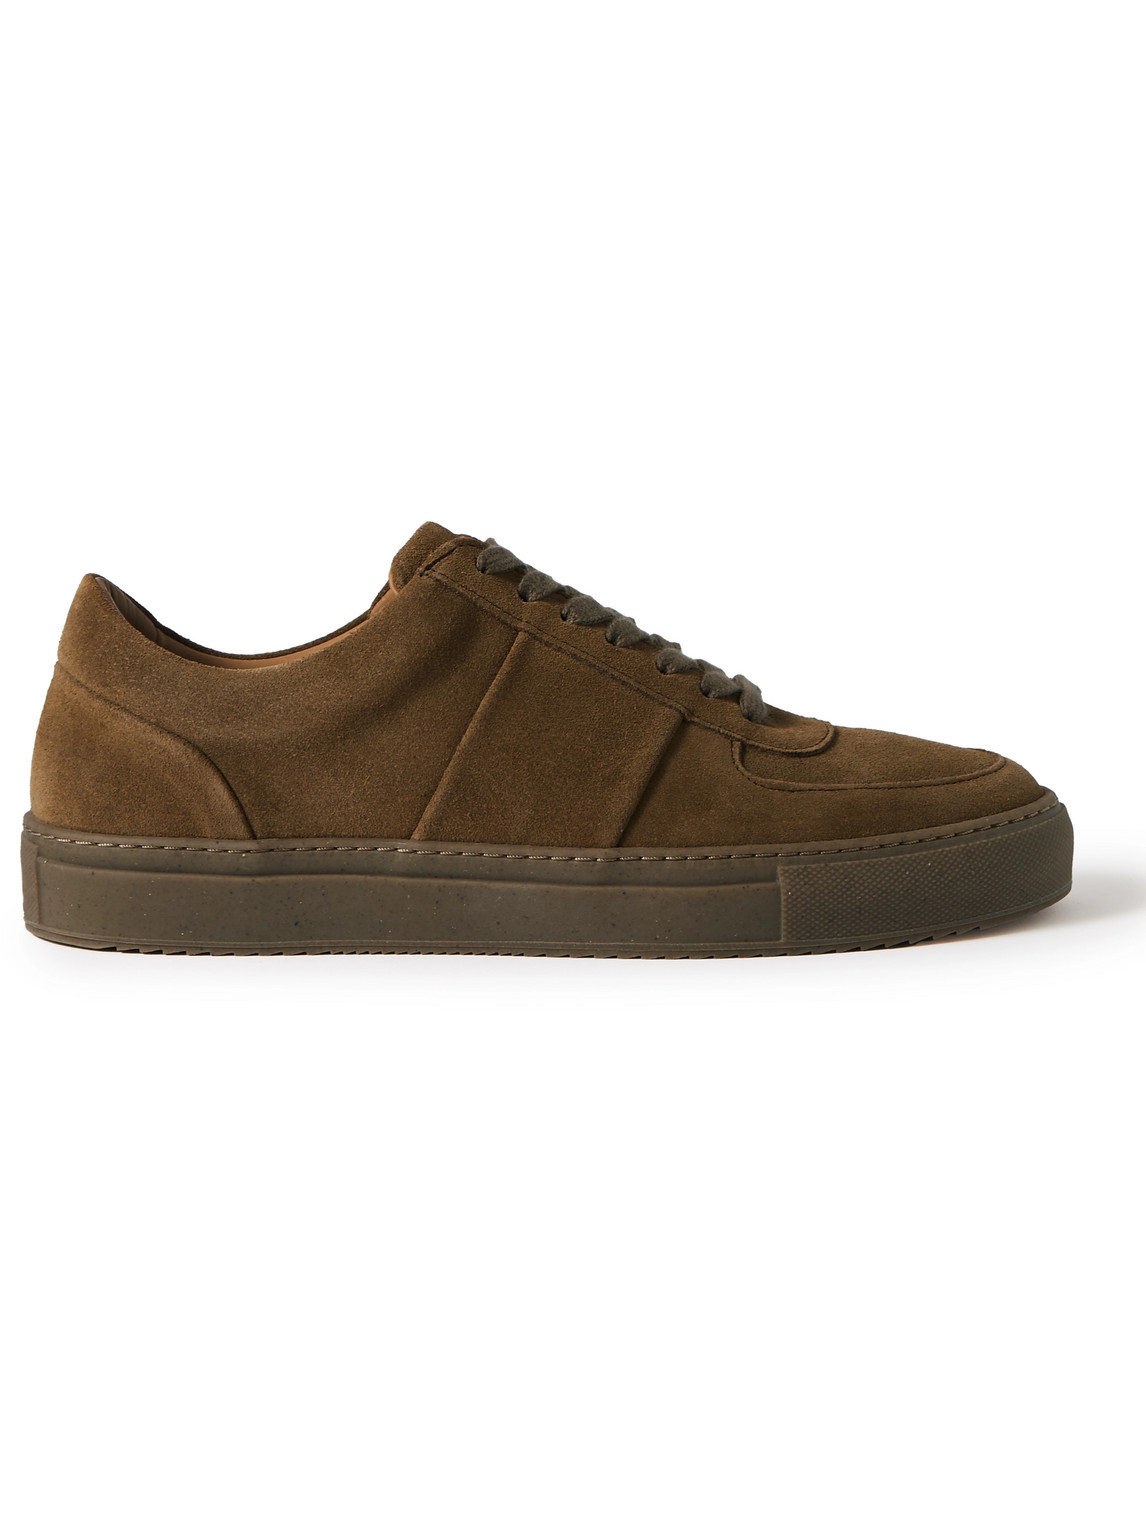 Mr P Larry Regenerated Suede By Evolo® Sneakers In Brown